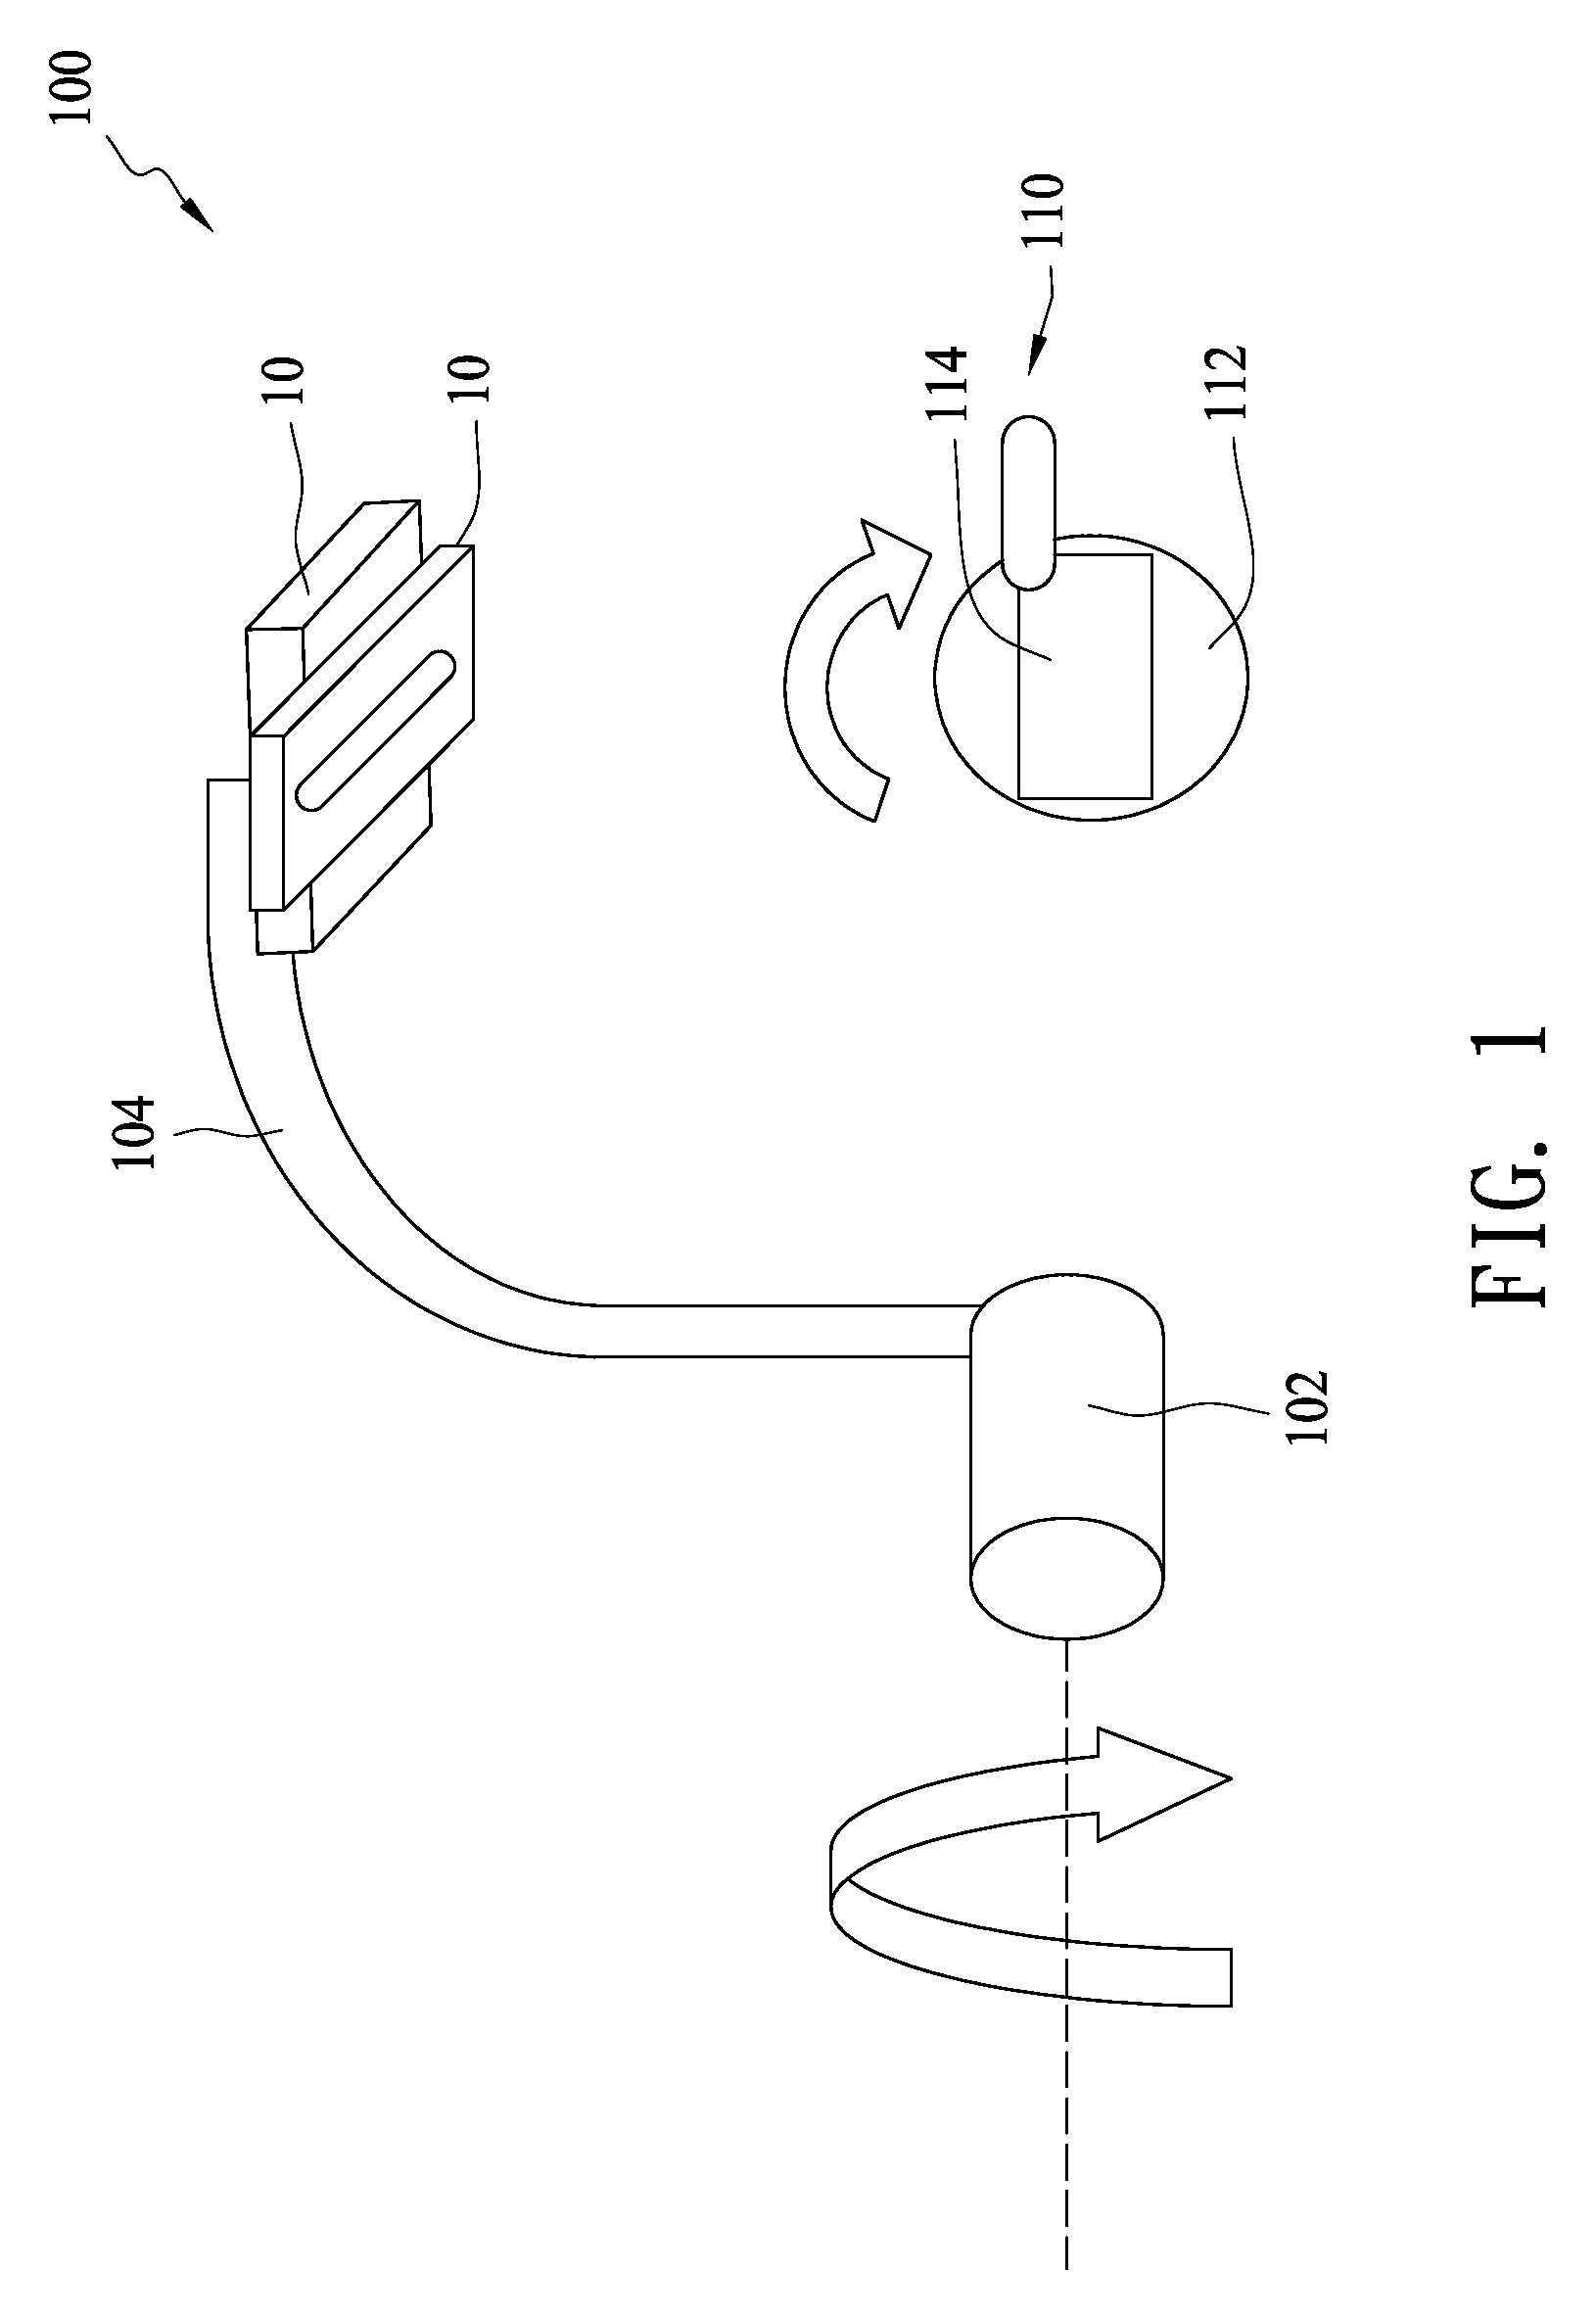 Optoelectronic system for sensing an electromagnetic field at total solid angle by having at least one optical modulator to change the intensity of an optical wave